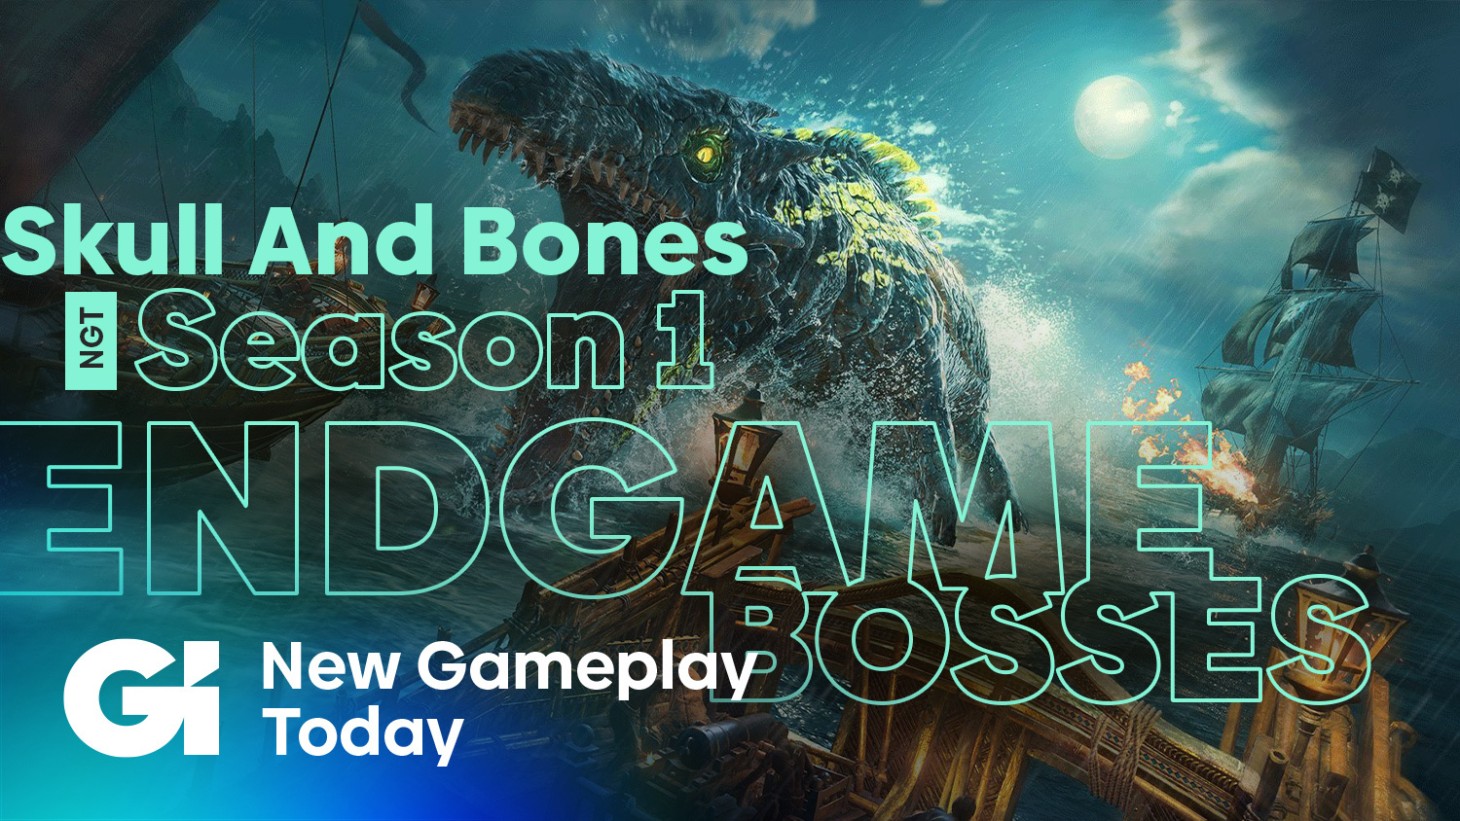 skull and bones new gameplay today preview endgame season 1 